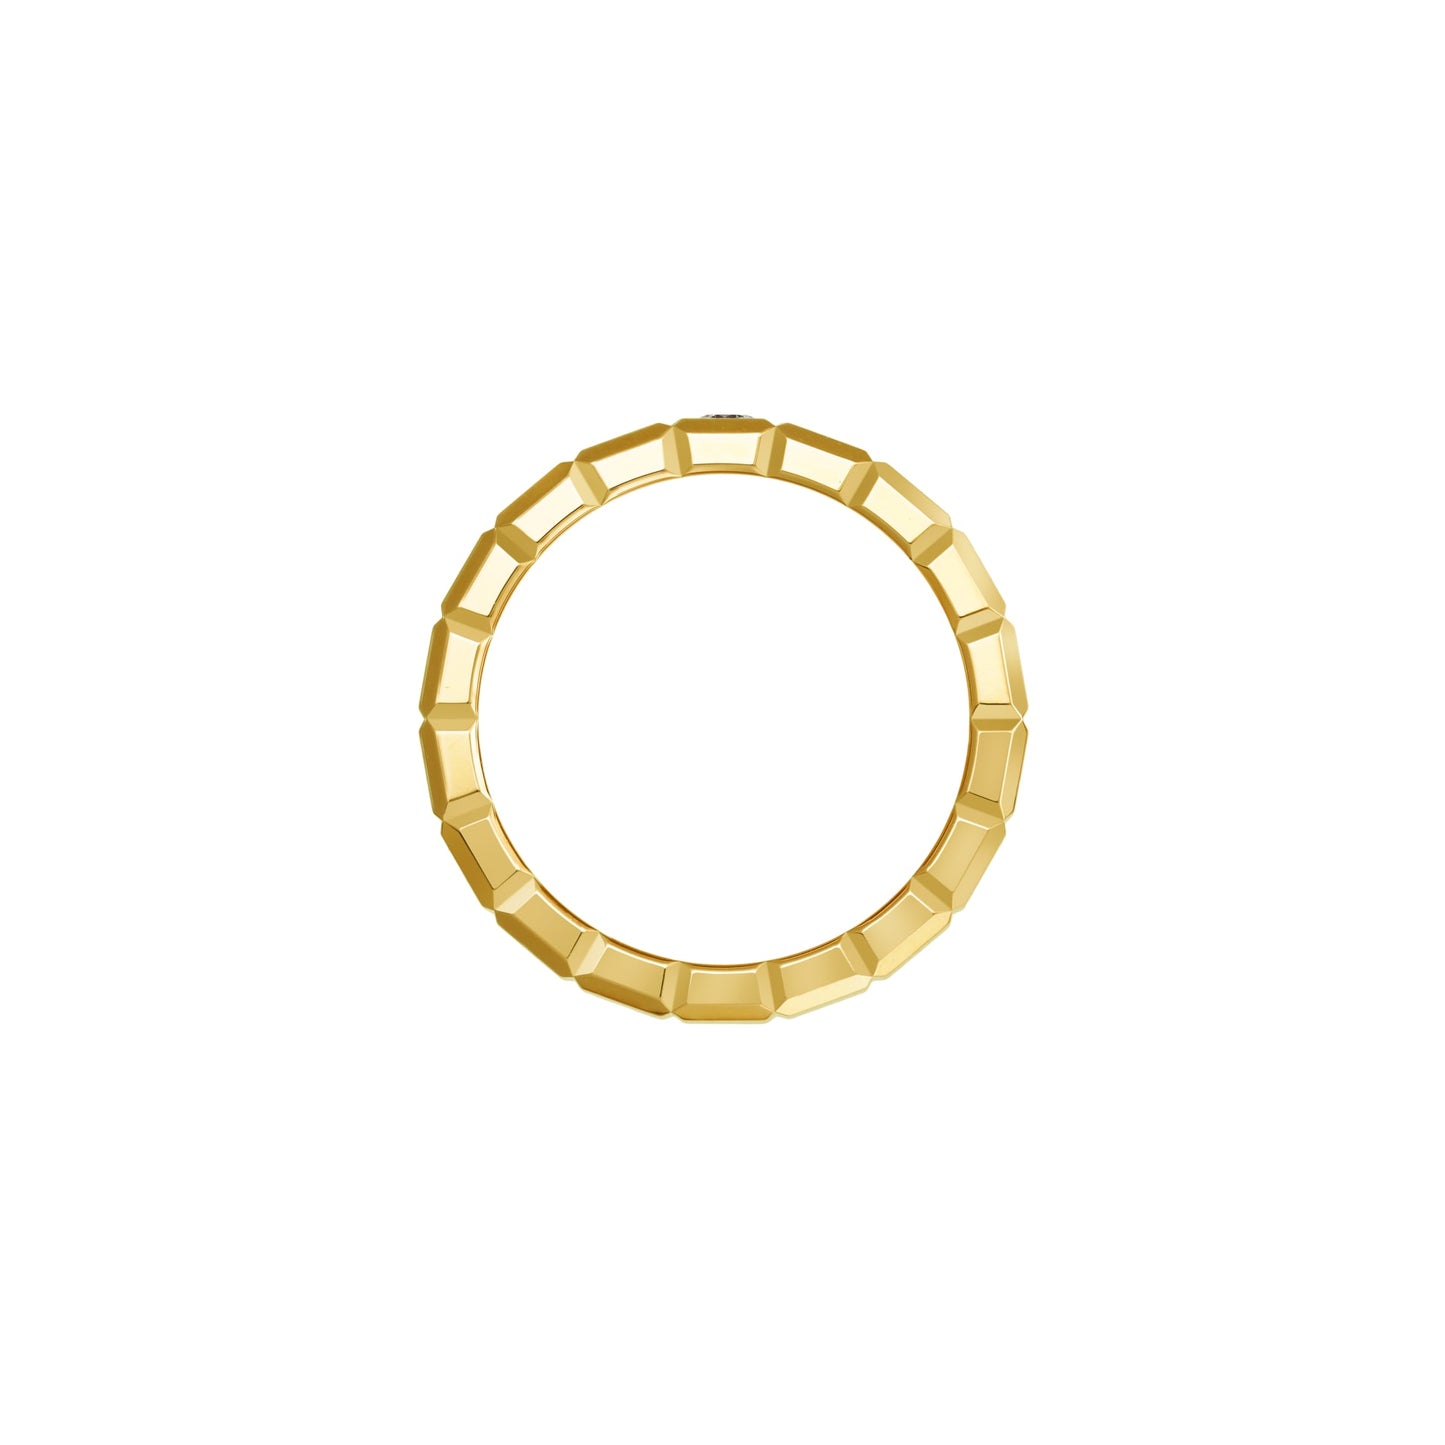 ICE CUBE RING, ETHICAL YELLOW GOLD, DIAMOND 829834-0069